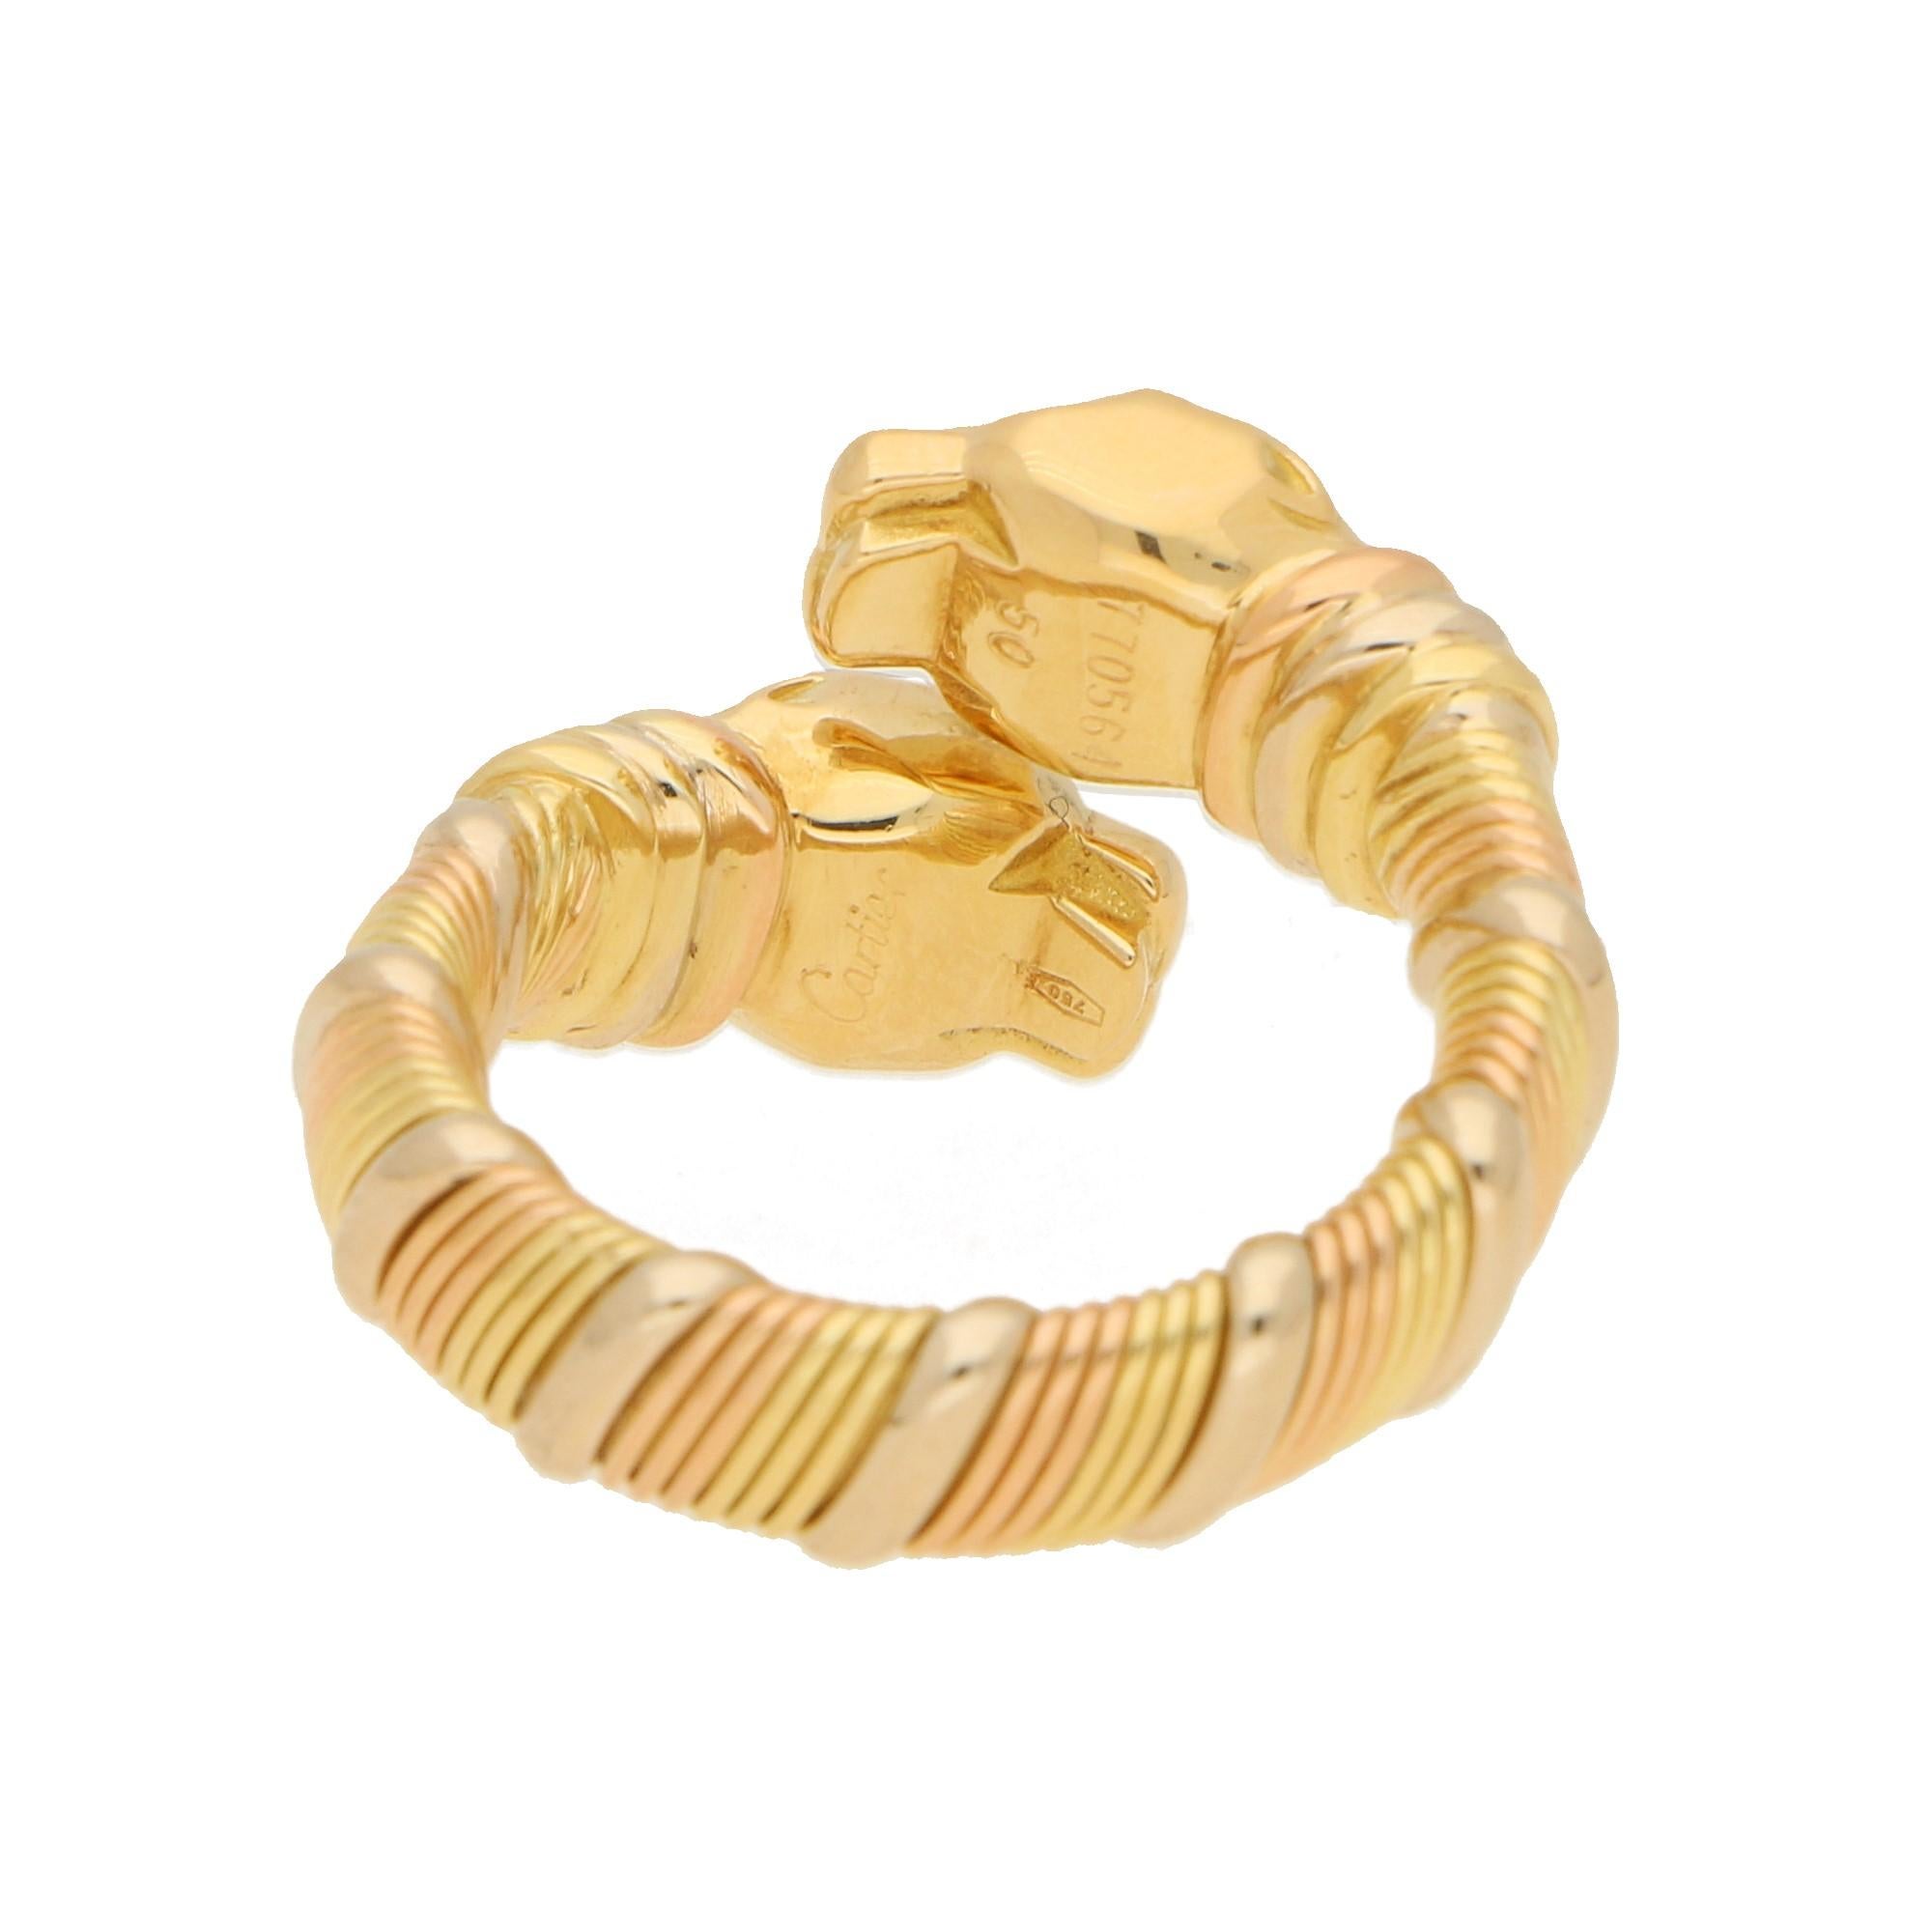 A beautiful Panthère de Cartier double headed crossover ring set in 18 karat rose, yellow and white gold. 

This ring is of an openwork design formed of two polished yellow gold panther heads, connected by a tri-colour gold coiled shank. It wold